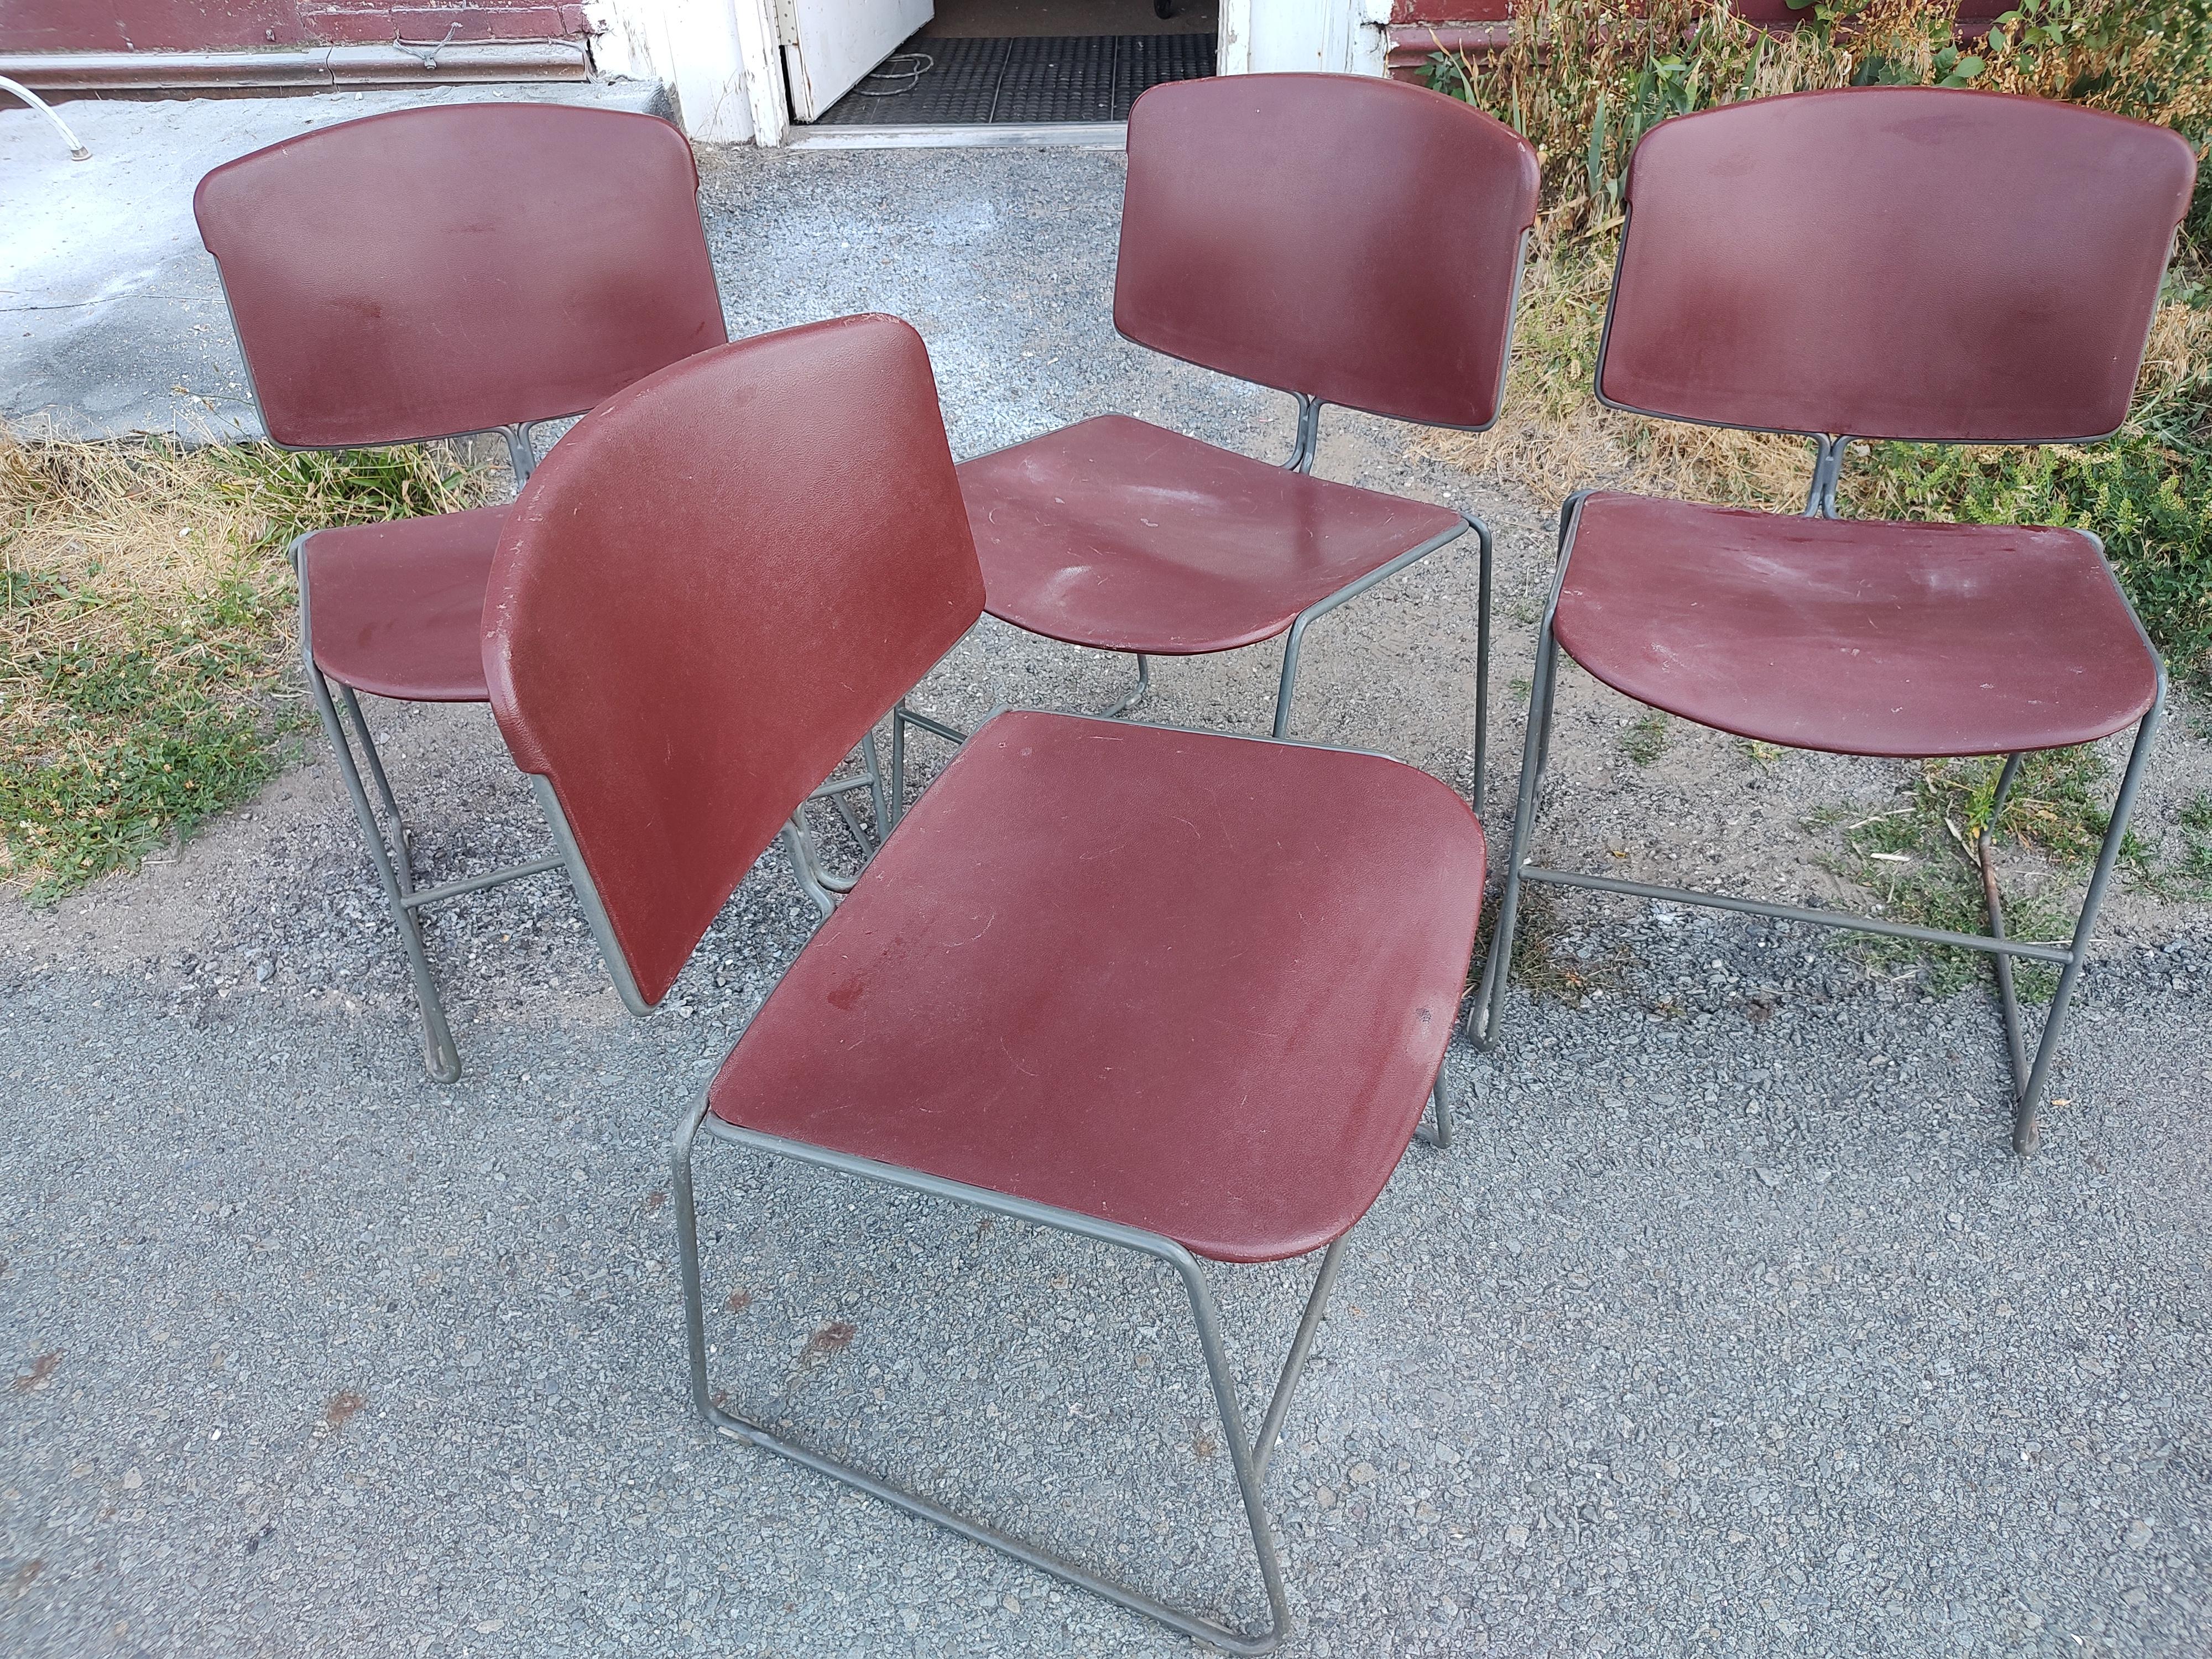 Late 20th Century Mid-Century Modern Max Stacker Steelcase Stacking Chairs Set of 4